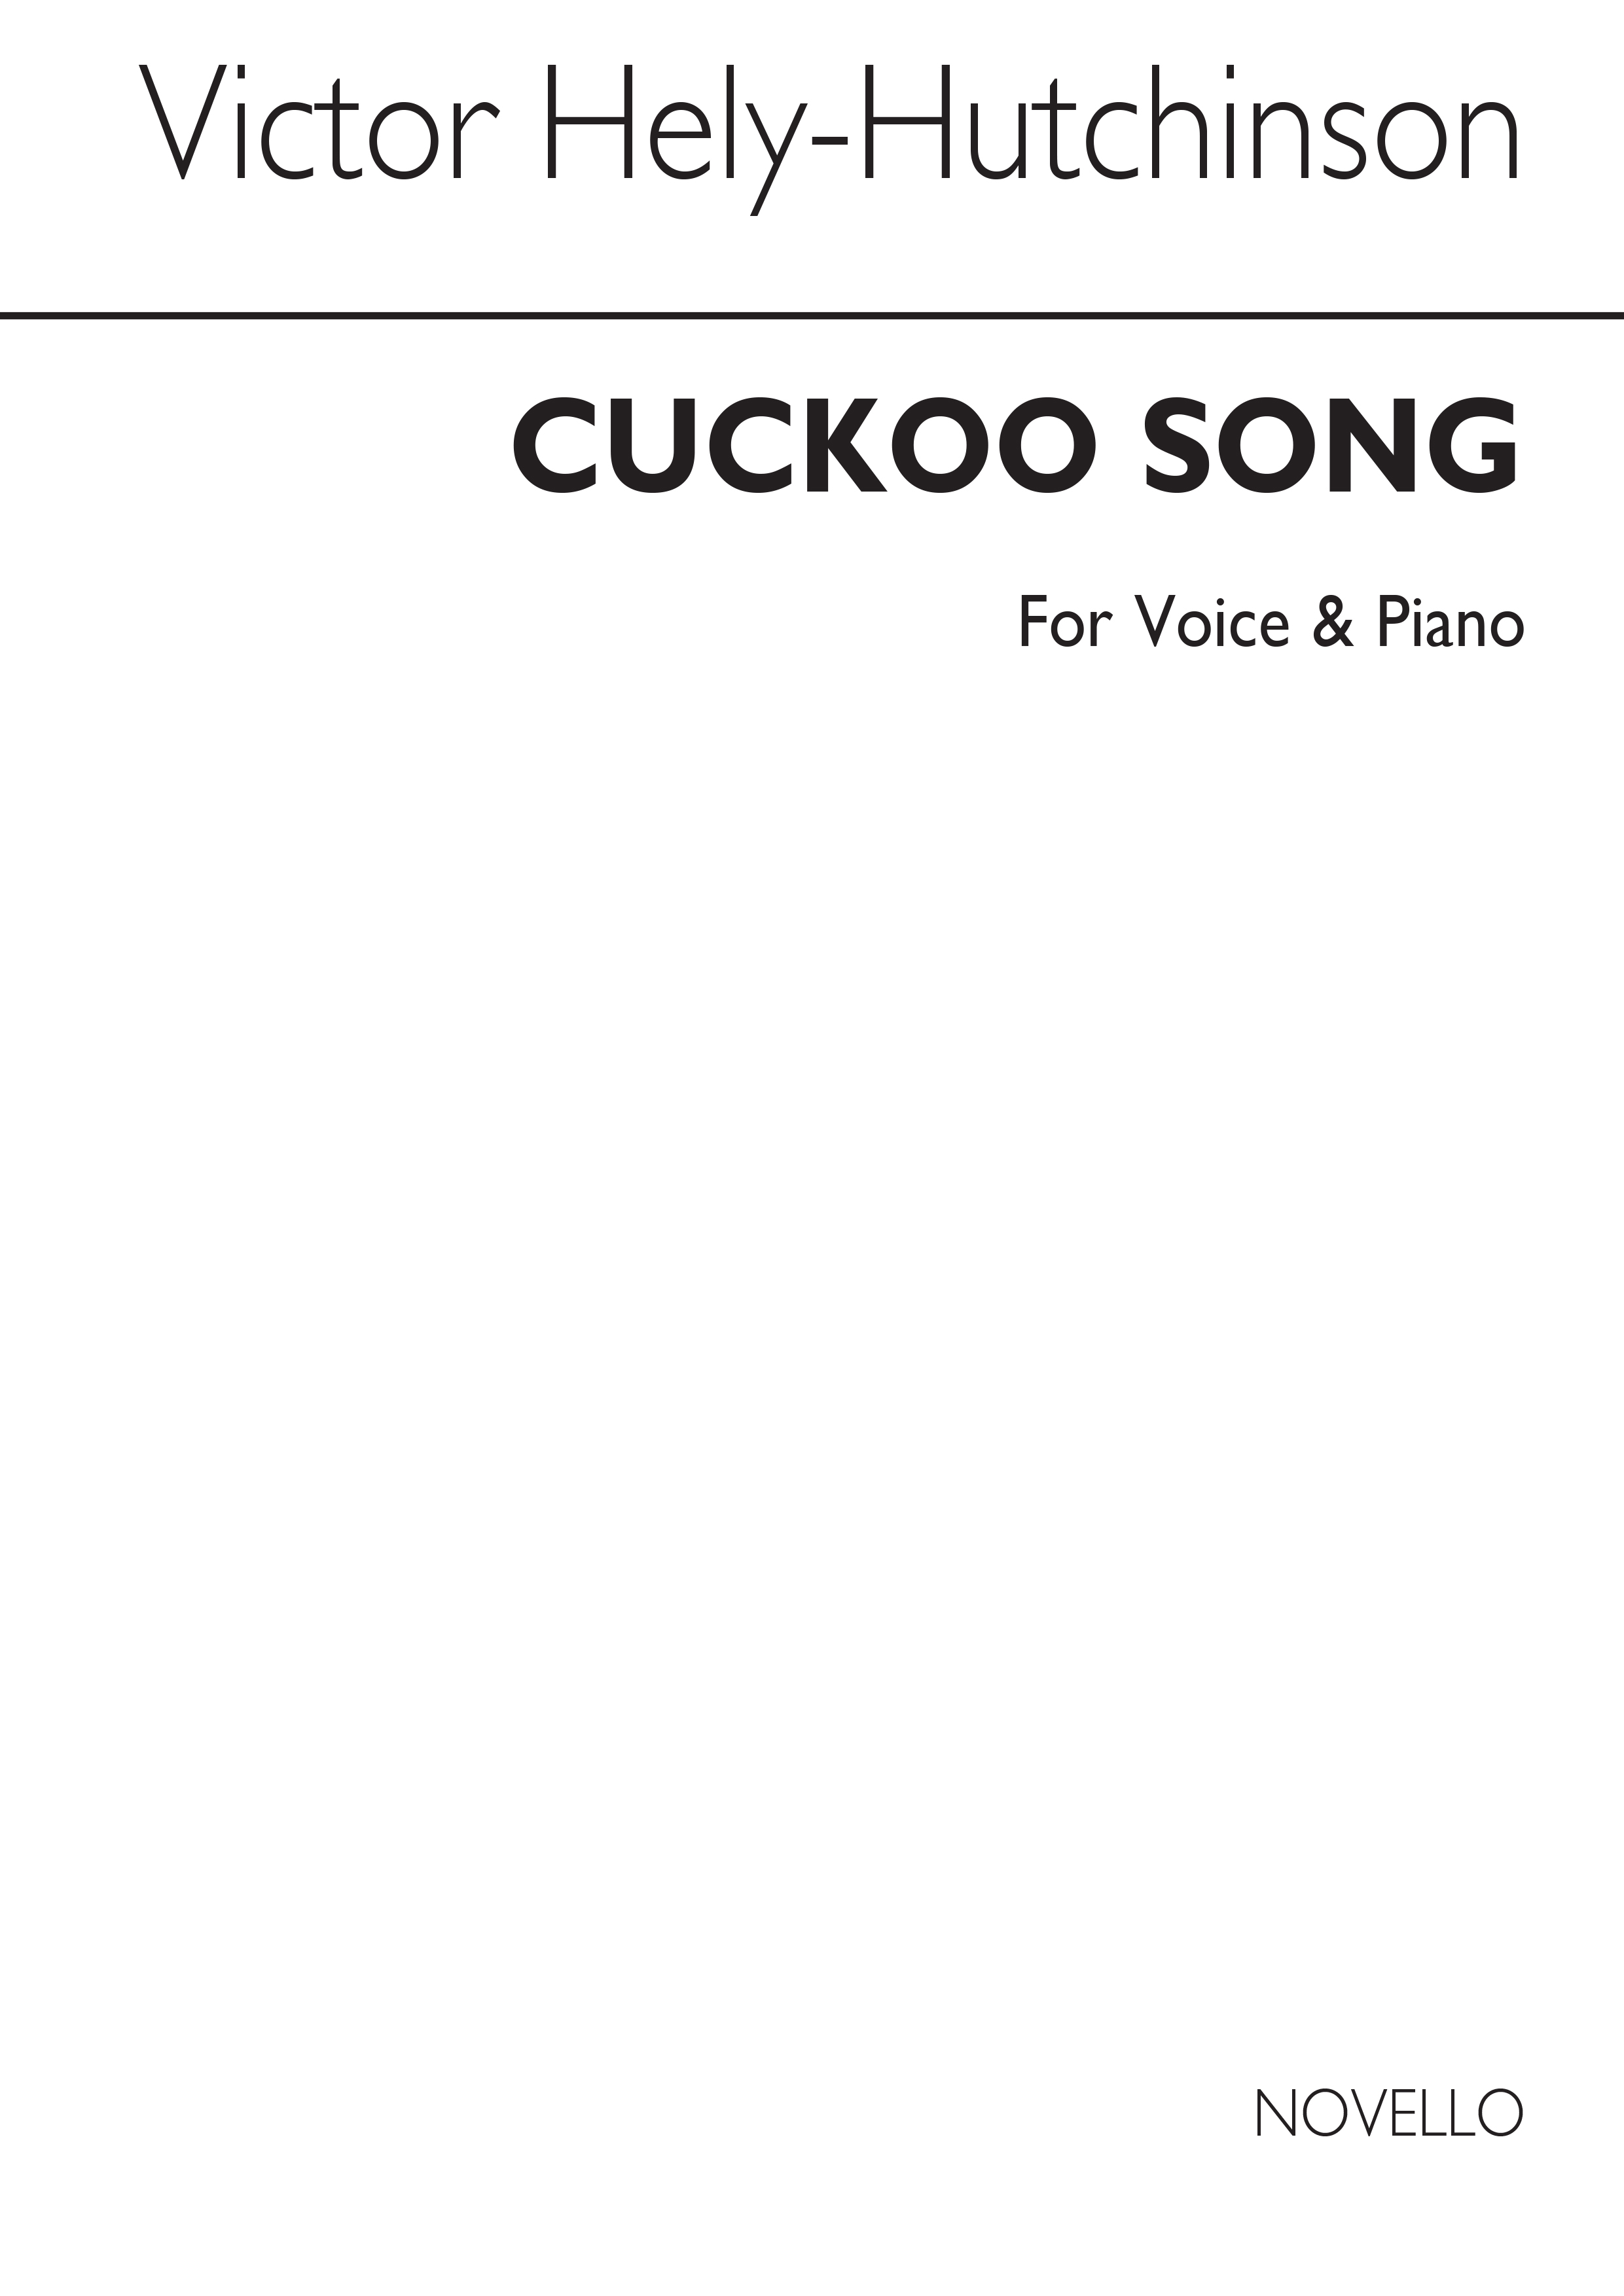 Hely-hutchinson: Cuckoo Song In C for High Voice and Piano